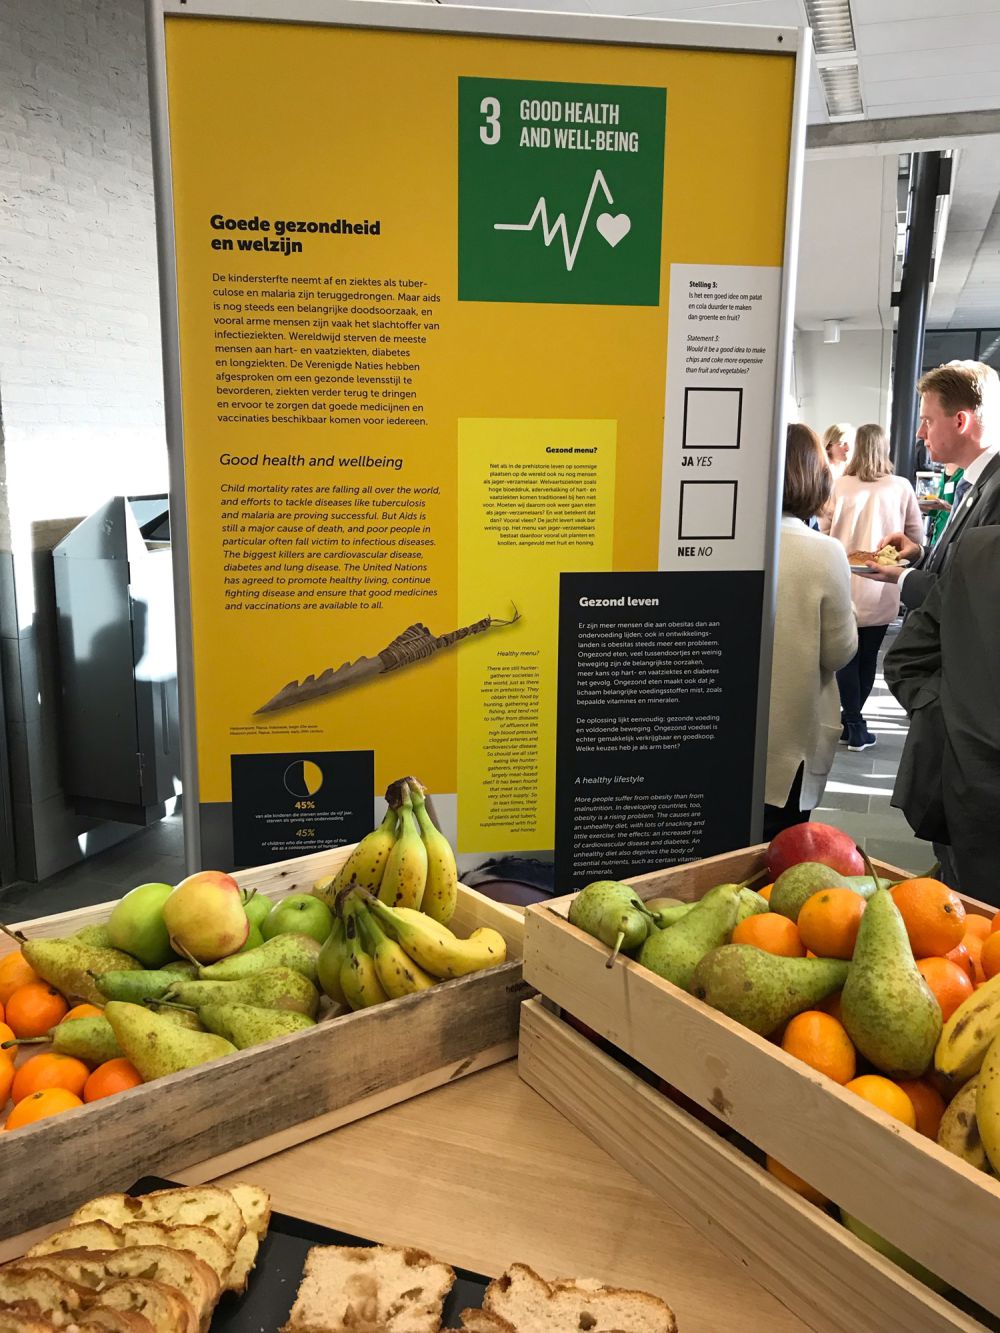 part of the exhibition "healthy food"